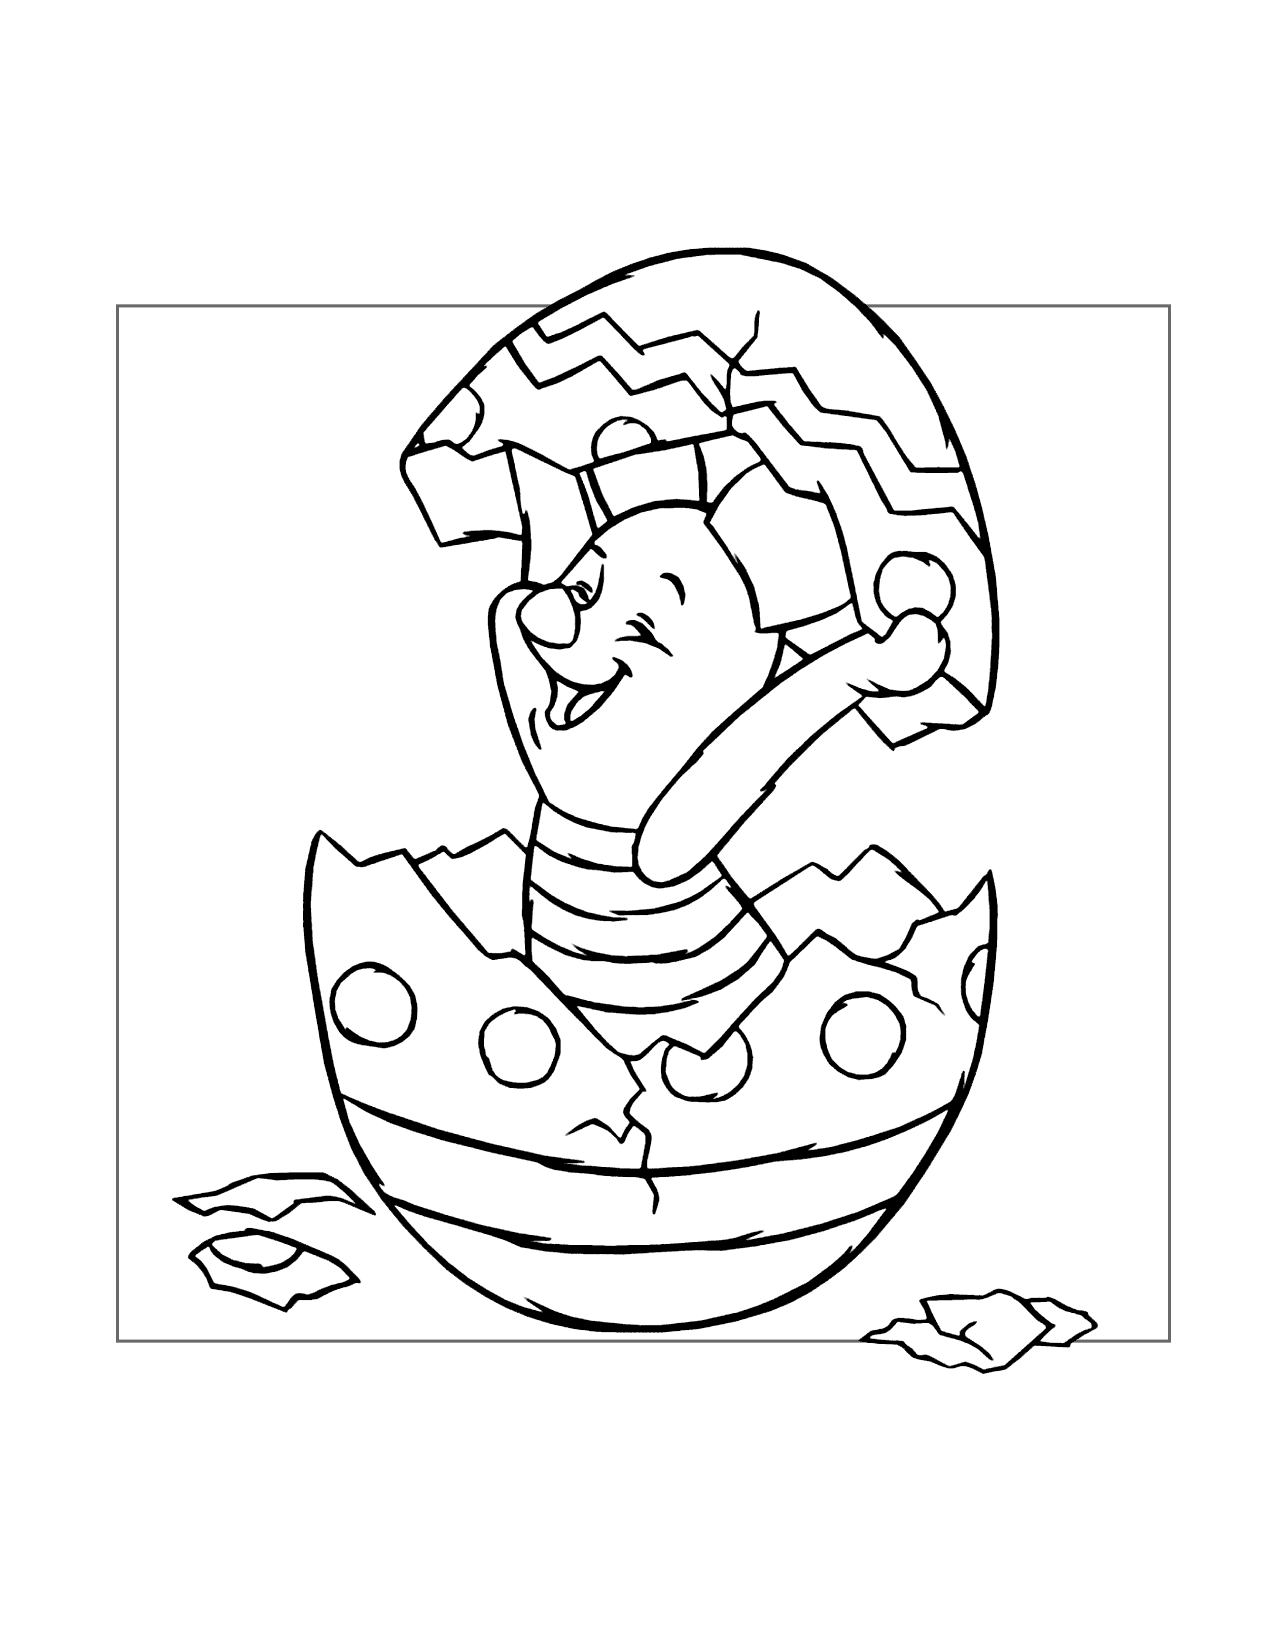 Easter Piglet Coloring Page